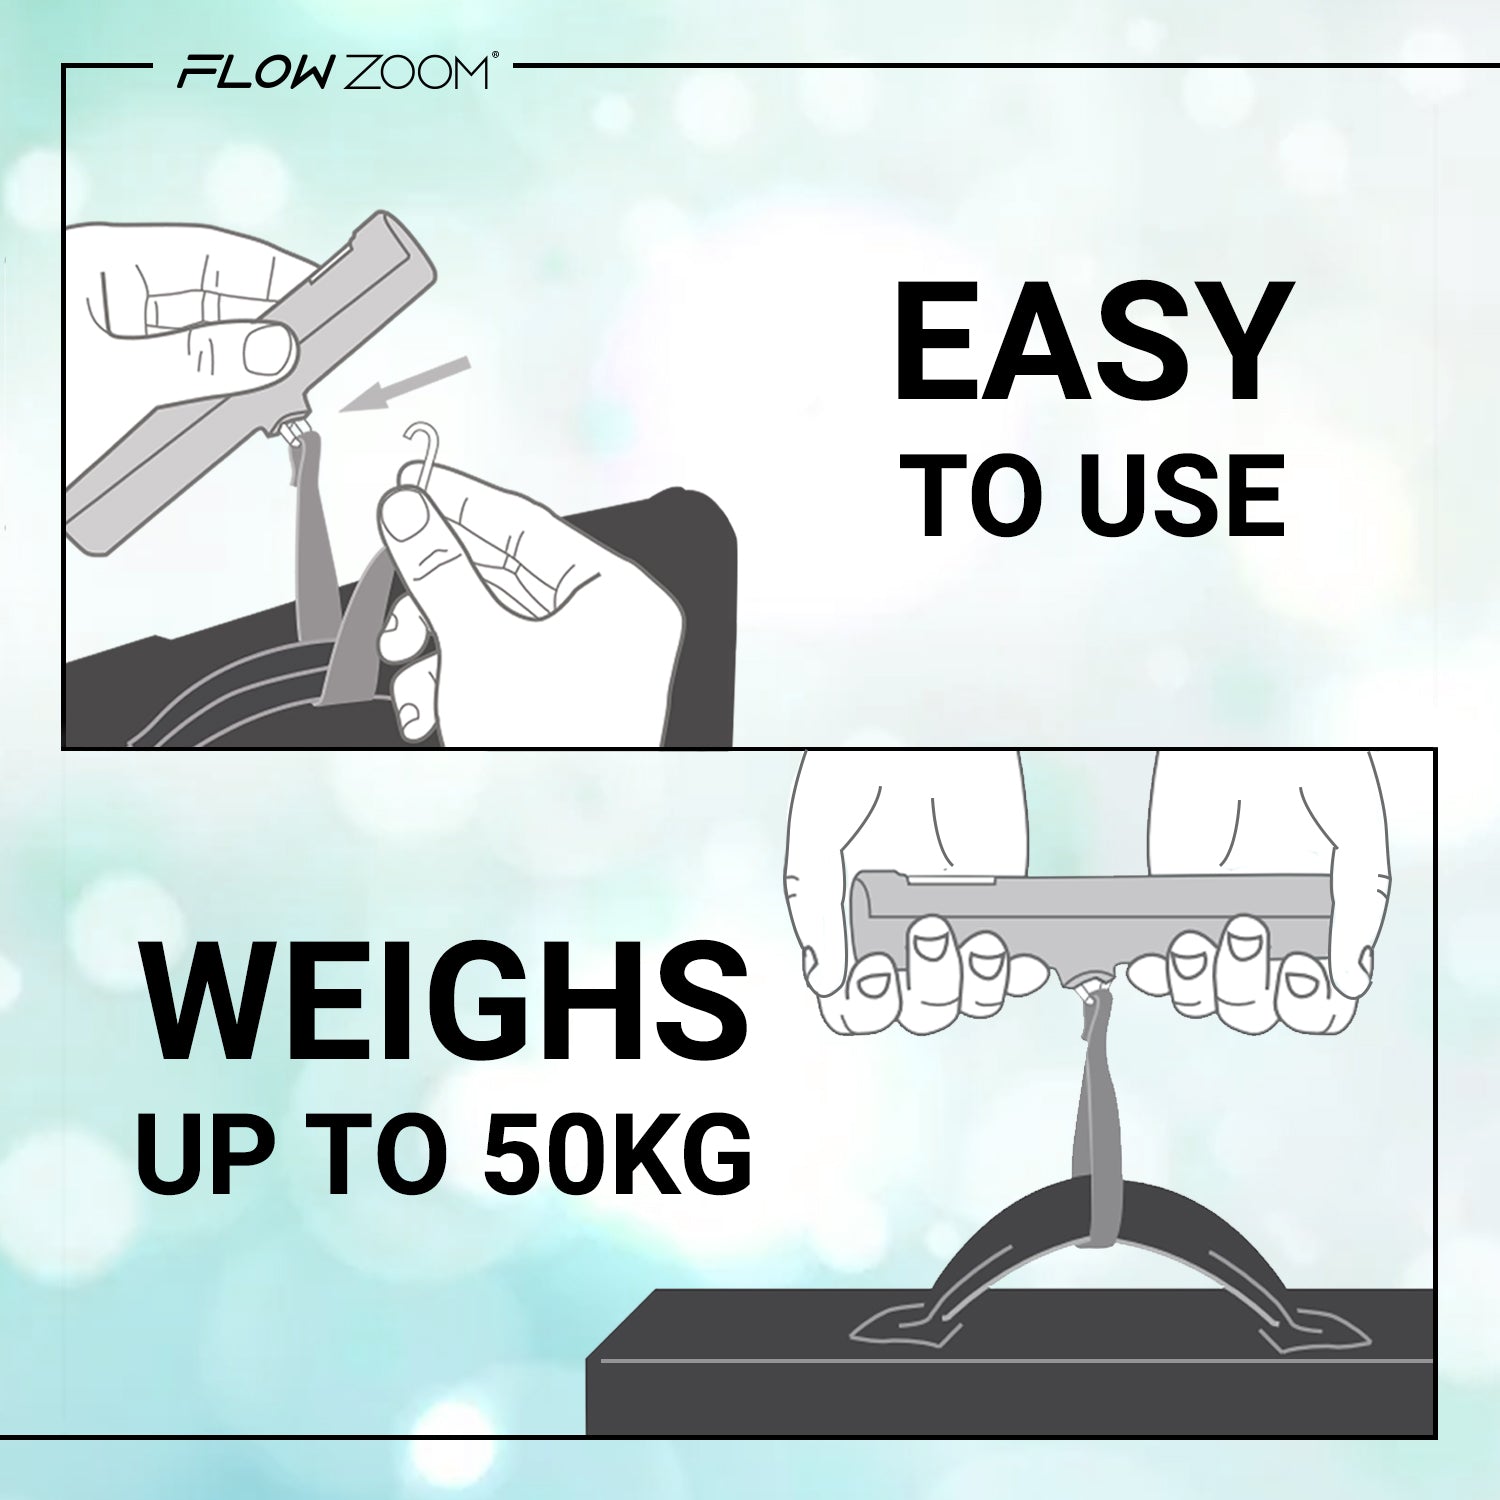 Luggage scale that weighs up to 50 kg